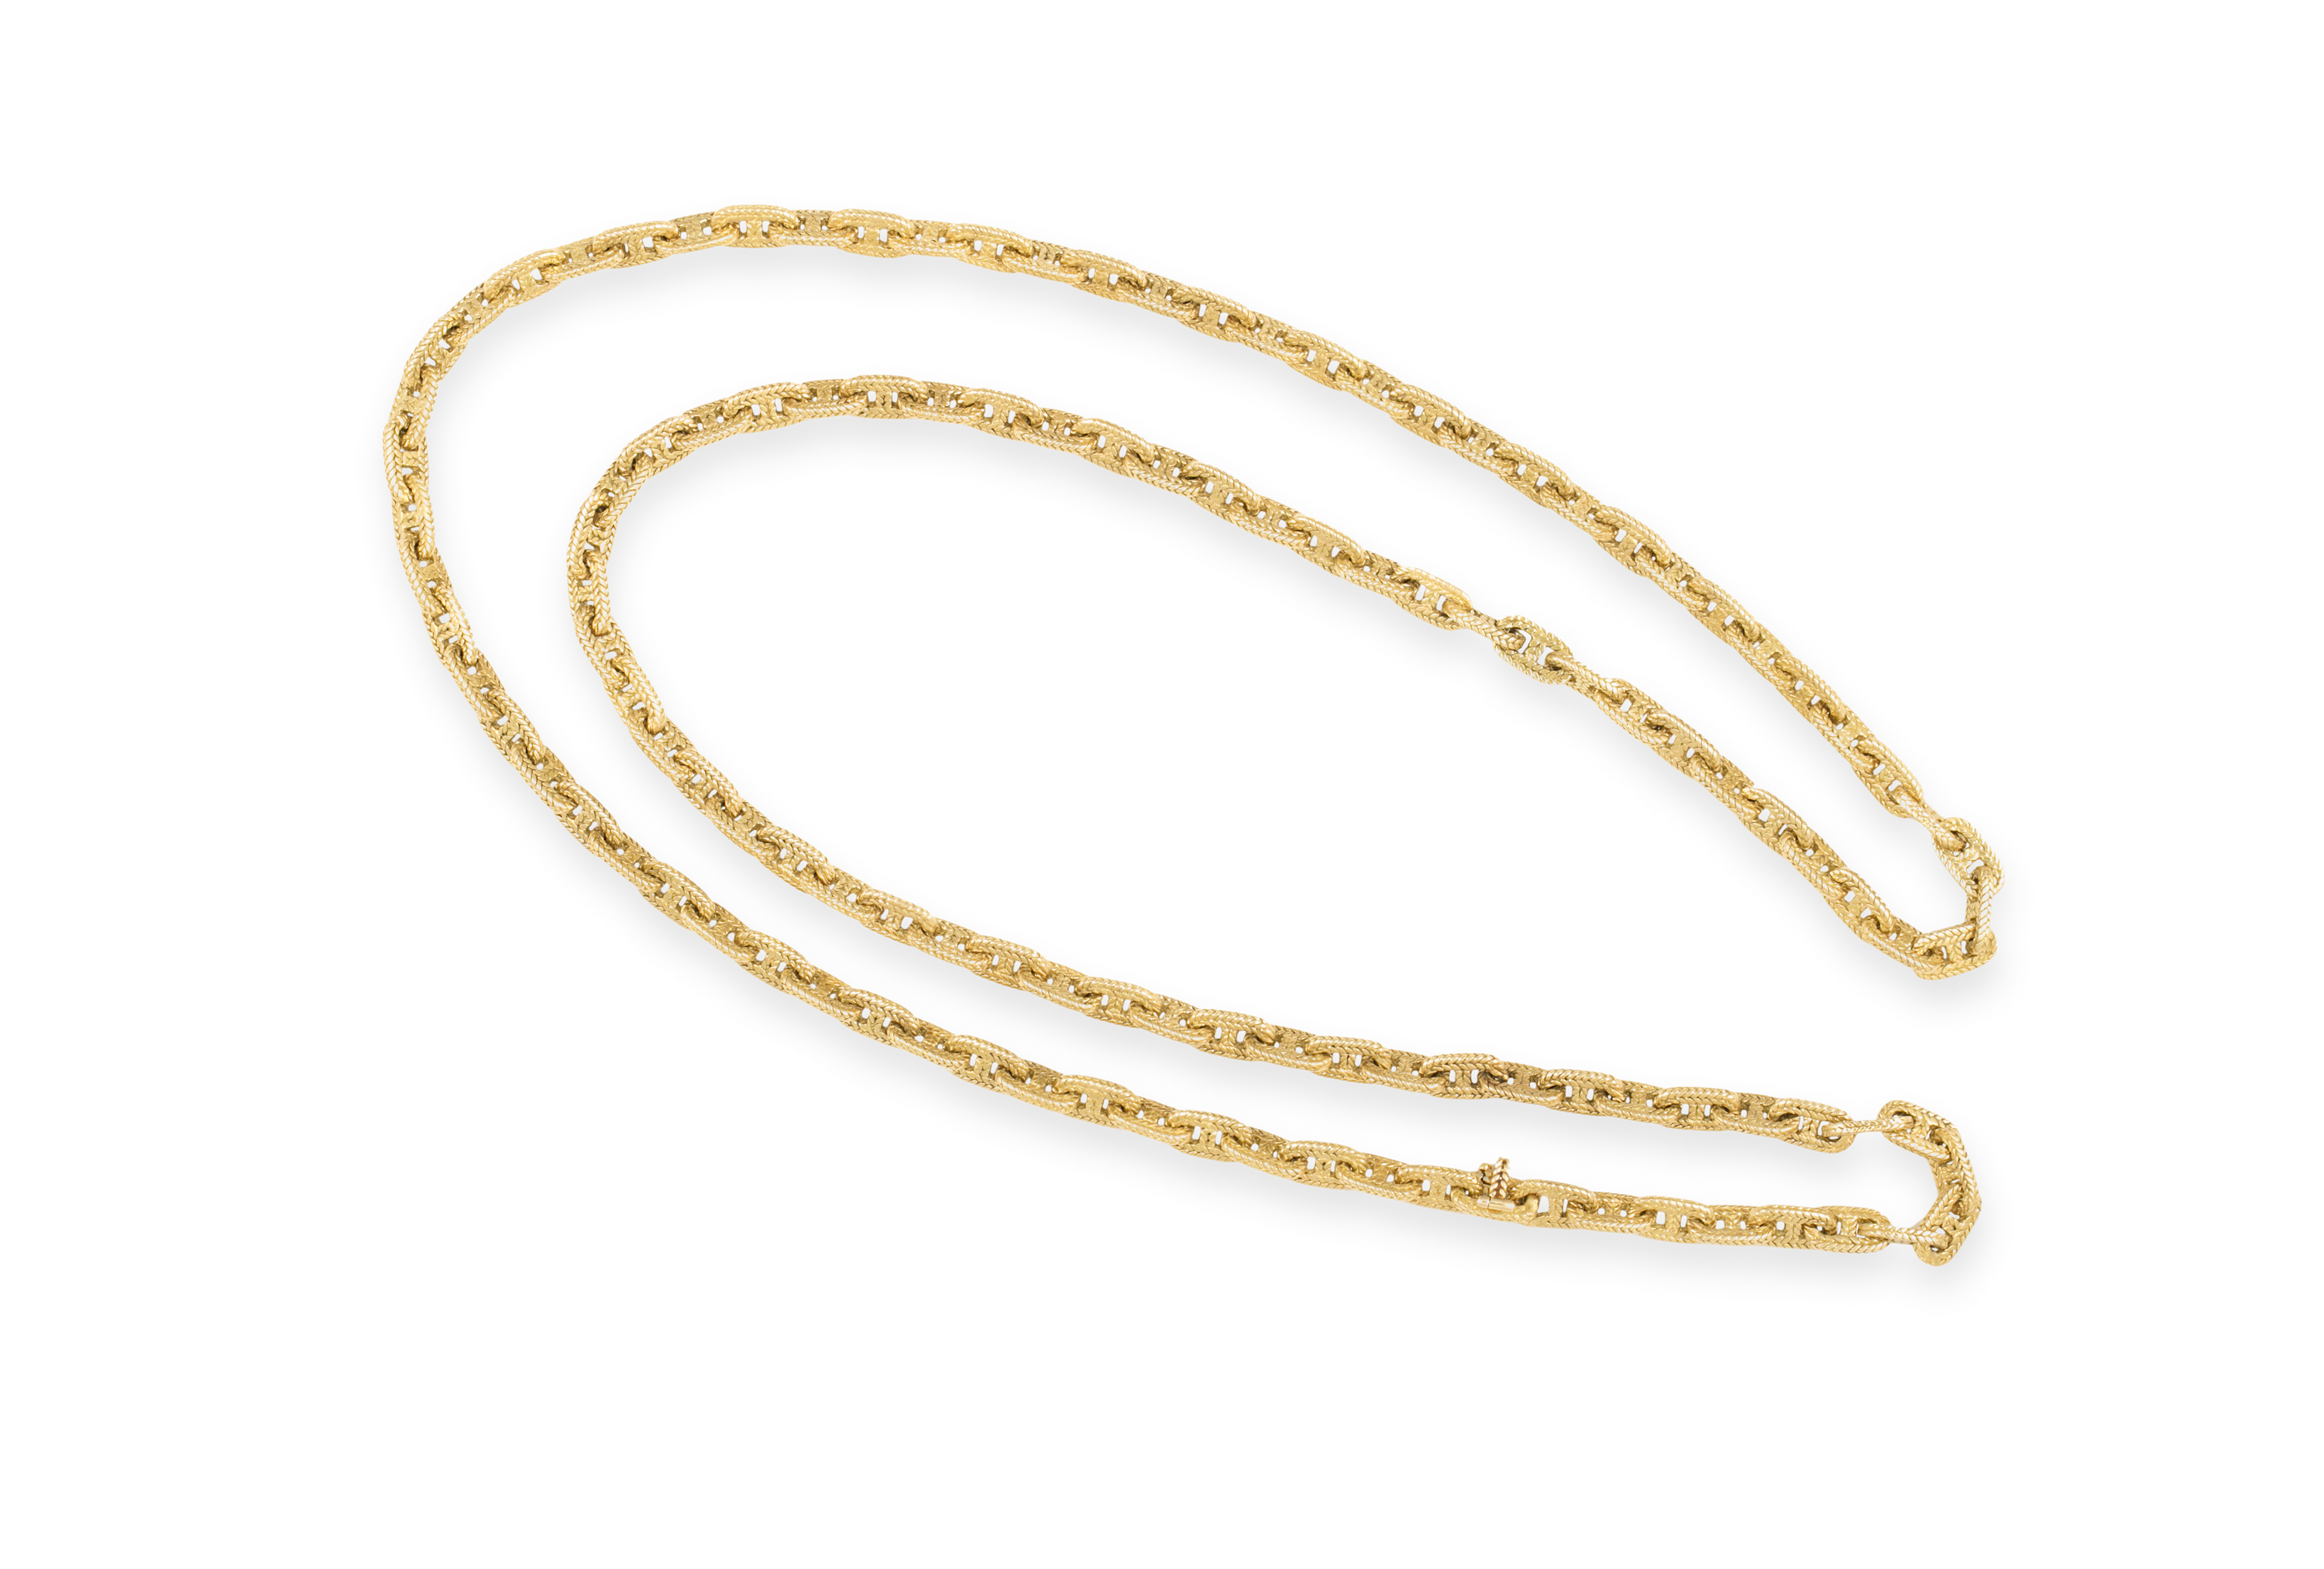 A GOLD CHAIN NECKLACE, BY HERMES, CIRCA 1965Of anchor link design with ropetwist details, in 18K - Image 2 of 3